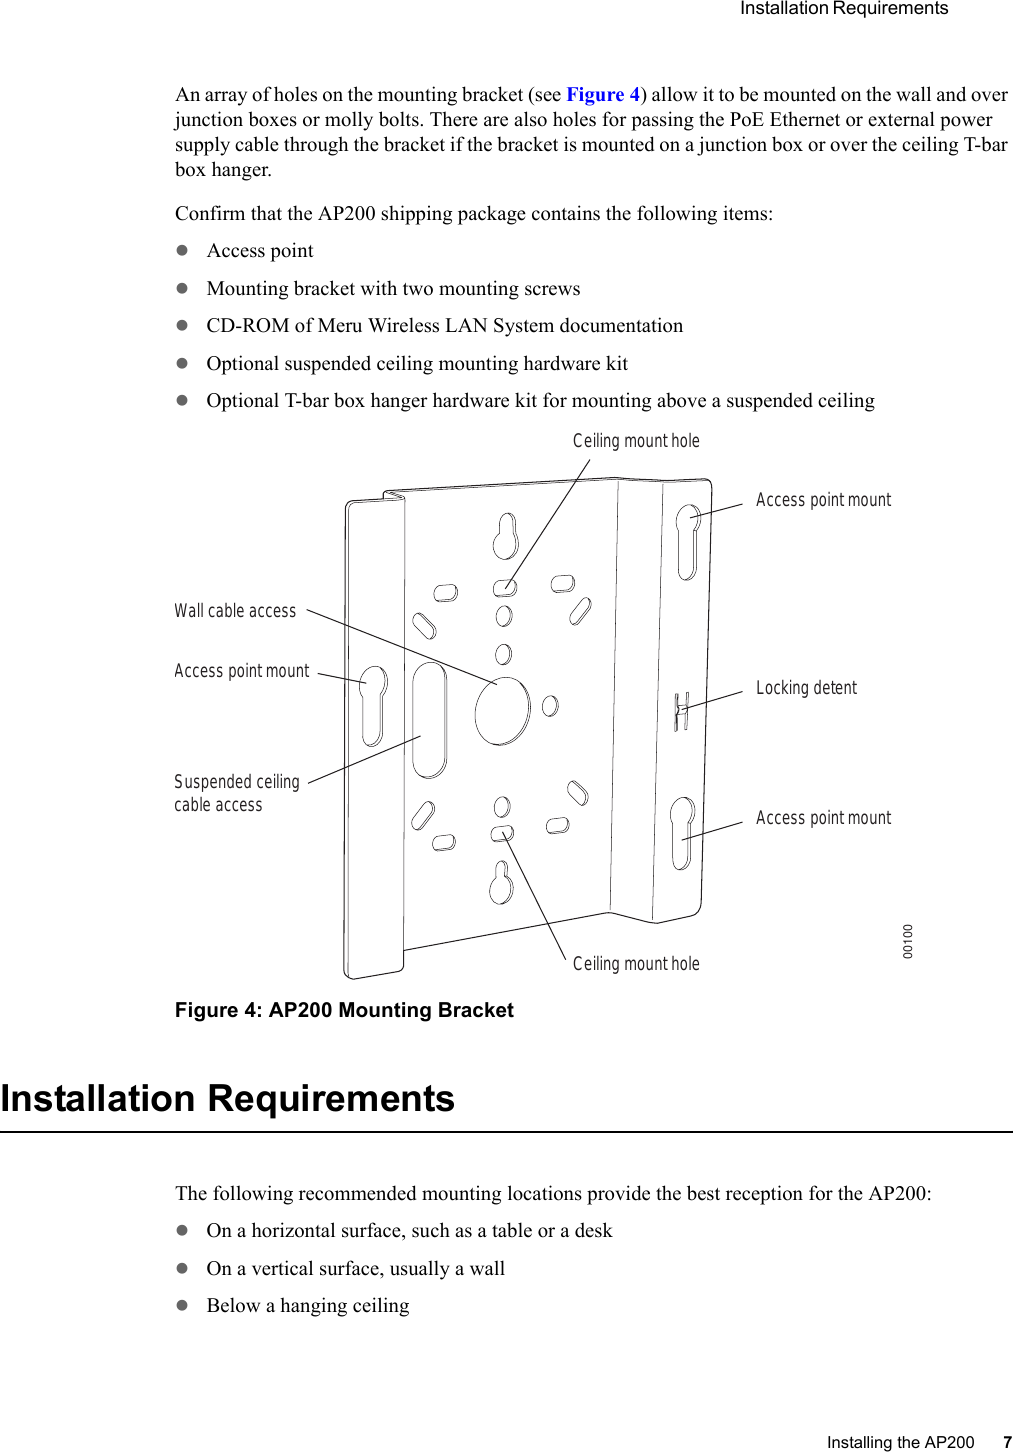  Installation Requirements Installing the AP200 7 An array of holes on the mounting bracket (see Figure 4) allow it to be mounted on the wall and over junction boxes or molly bolts. There are also holes for passing the PoE Ethernet or external power supply cable through the bracket if the bracket is mounted on a junction box or over the ceiling T-bar box hanger. Confirm that the AP200 shipping package contains the following items:zAccess point zMounting bracket with two mounting screwszCD-ROM of Meru Wireless LAN System documentationzOptional suspended ceiling mounting hardware kitzOptional T-bar box hanger hardware kit for mounting above a suspended ceilingFigure 4: AP200 Mounting BracketInstallation RequirementsThe following recommended mounting locations provide the best reception for the AP200:zOn a horizontal surface, such as a table or a deskzOn a vertical surface, usually a wallzBelow a hanging ceilingAccess point mountCeiling mount holeCeiling mount holeAccess point mountAccess point mountLocking detentWall cable accessSuspended ceilingcable access00100